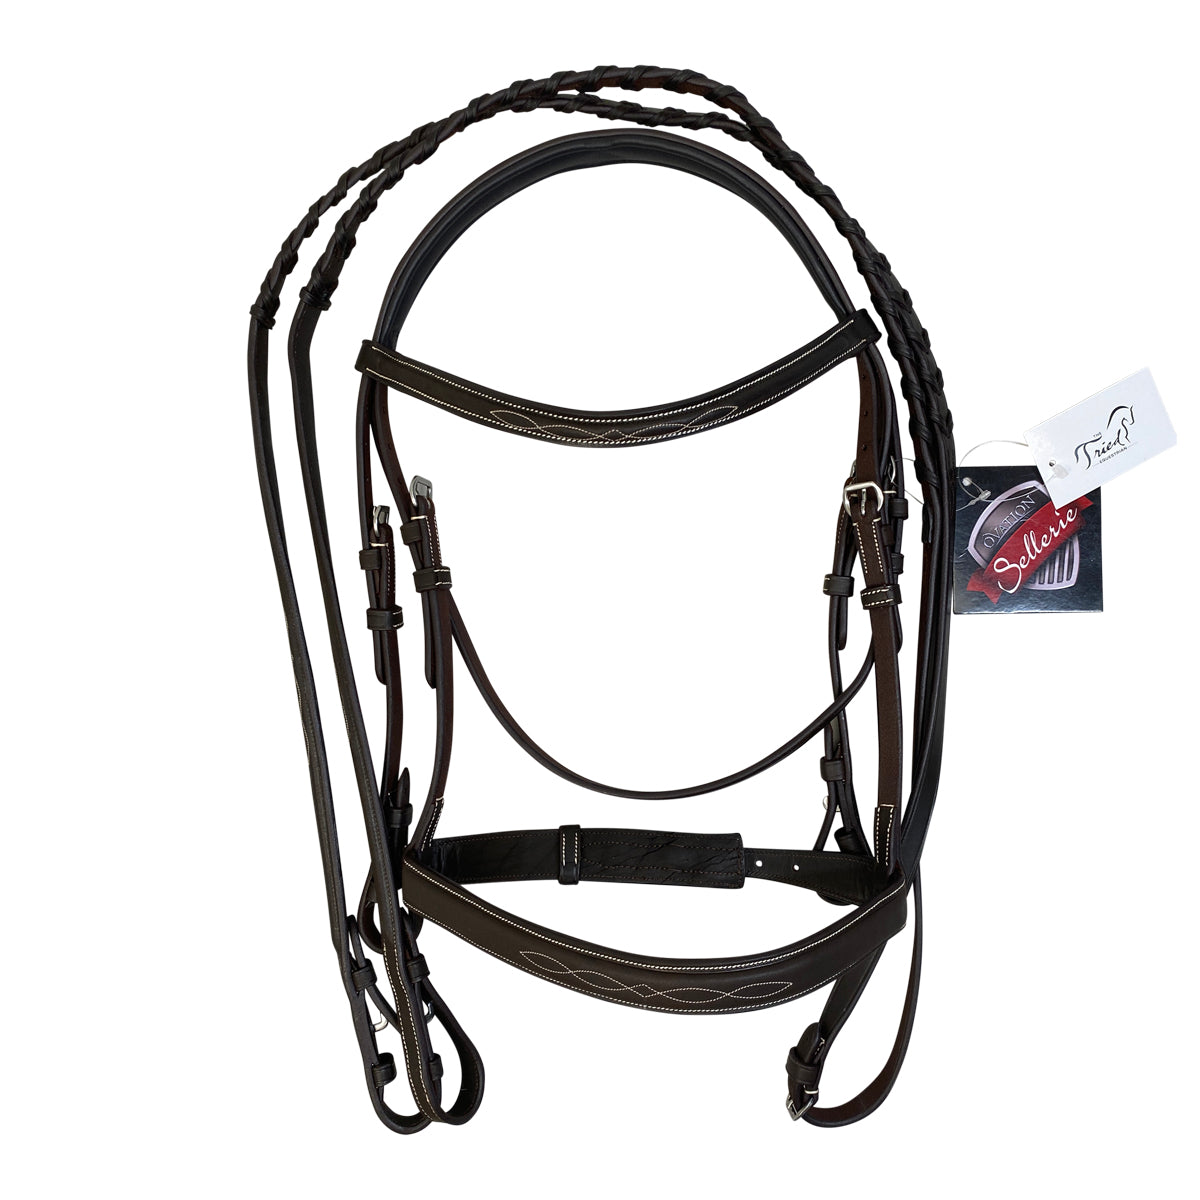 Ovation Classic &#39;Fancy Stitched Wide Nose Comfort Crown&#39; Bridle in Brown - Oversize